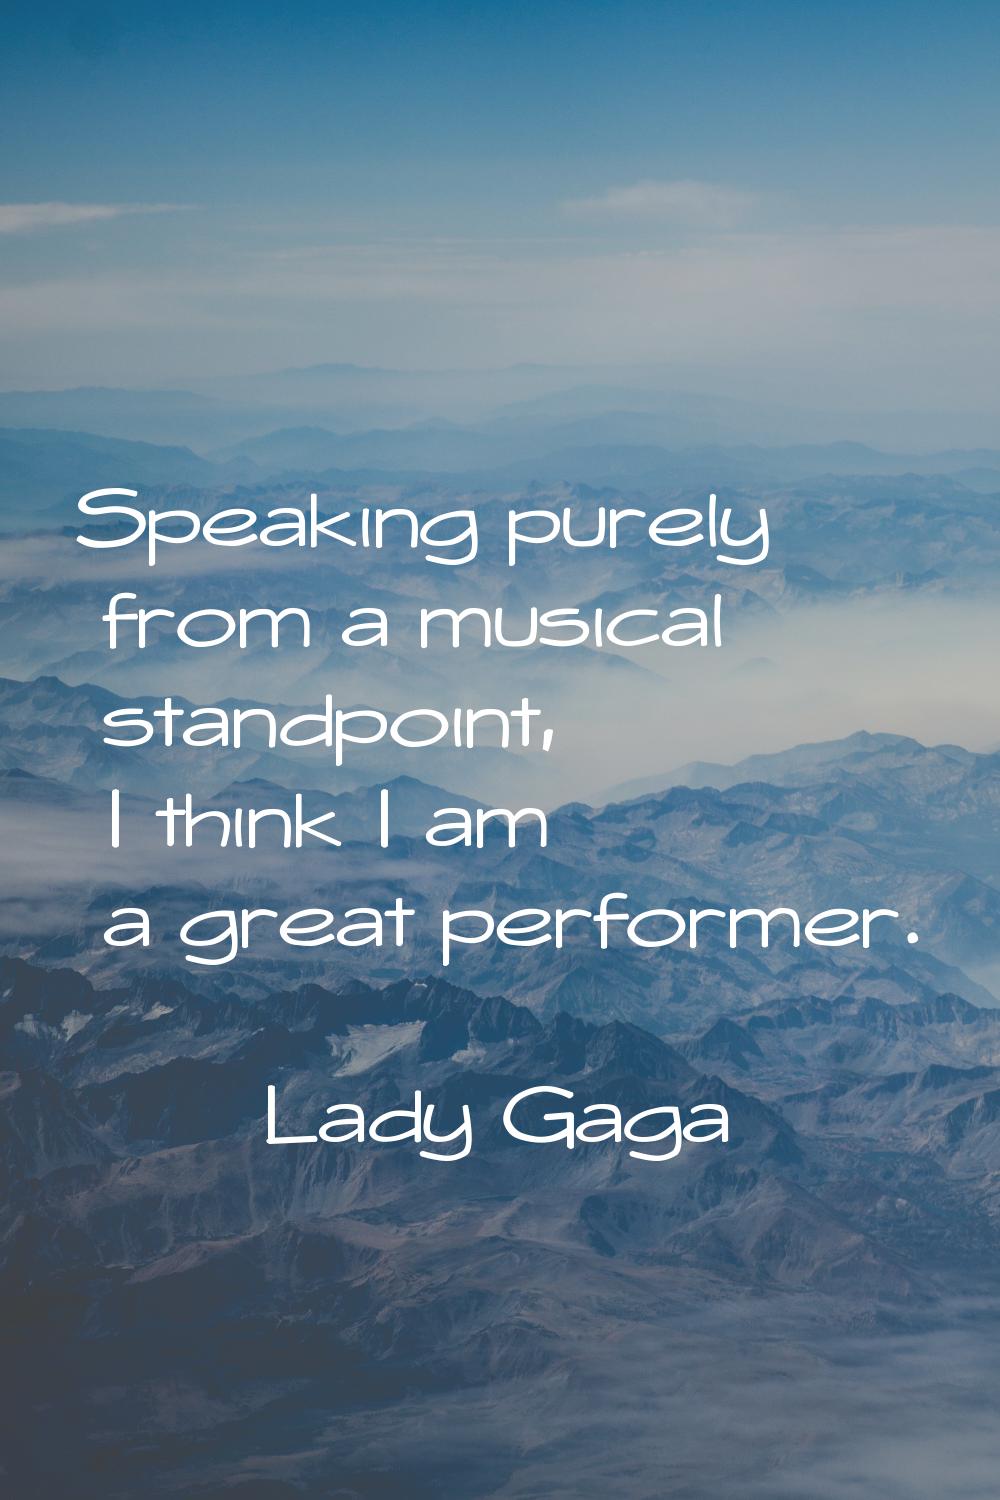 Speaking purely from a musical standpoint, I think I am a great performer.